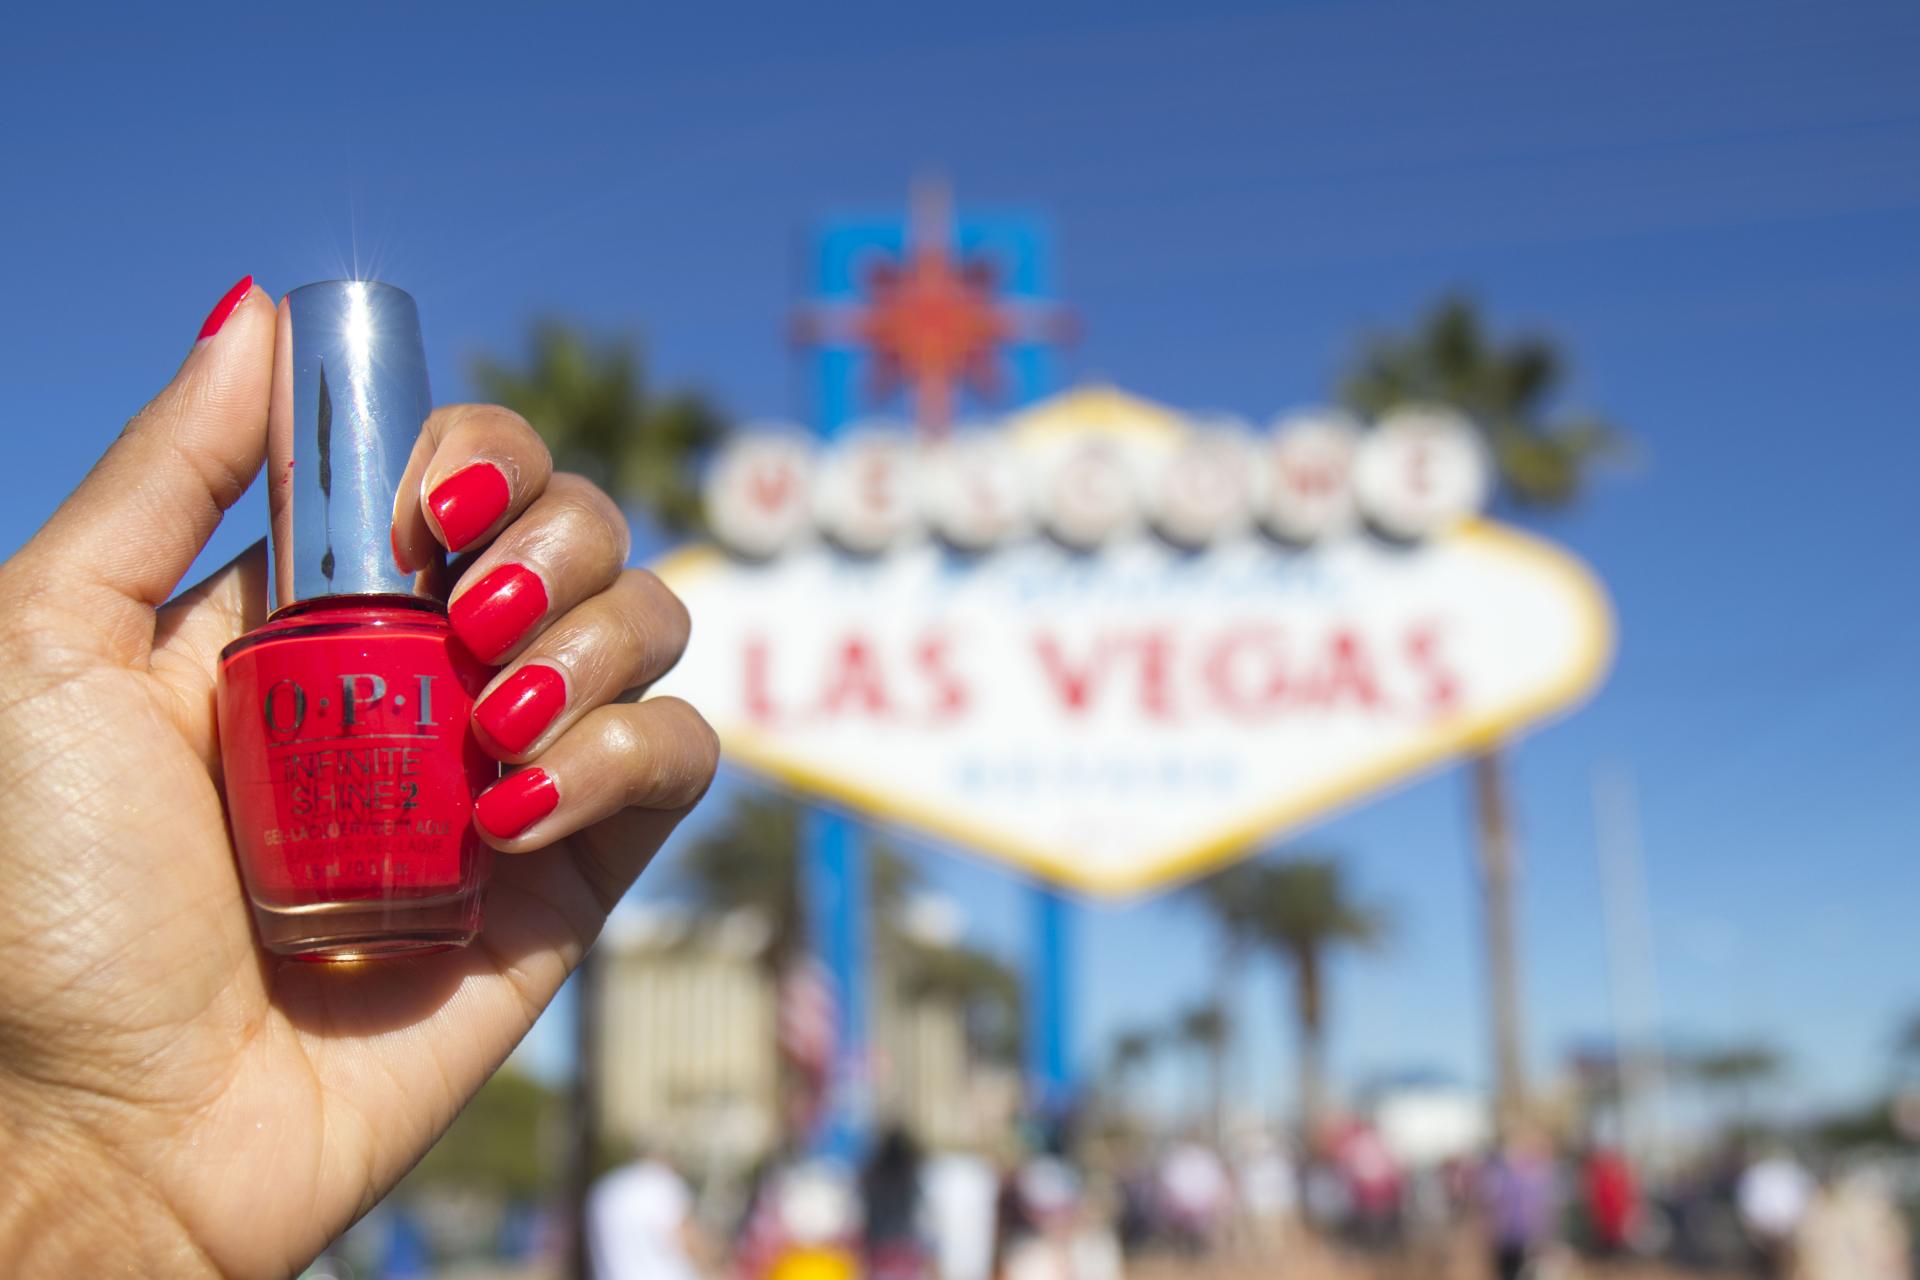 “Unrepentantly Red” by OPI Infinite Shine